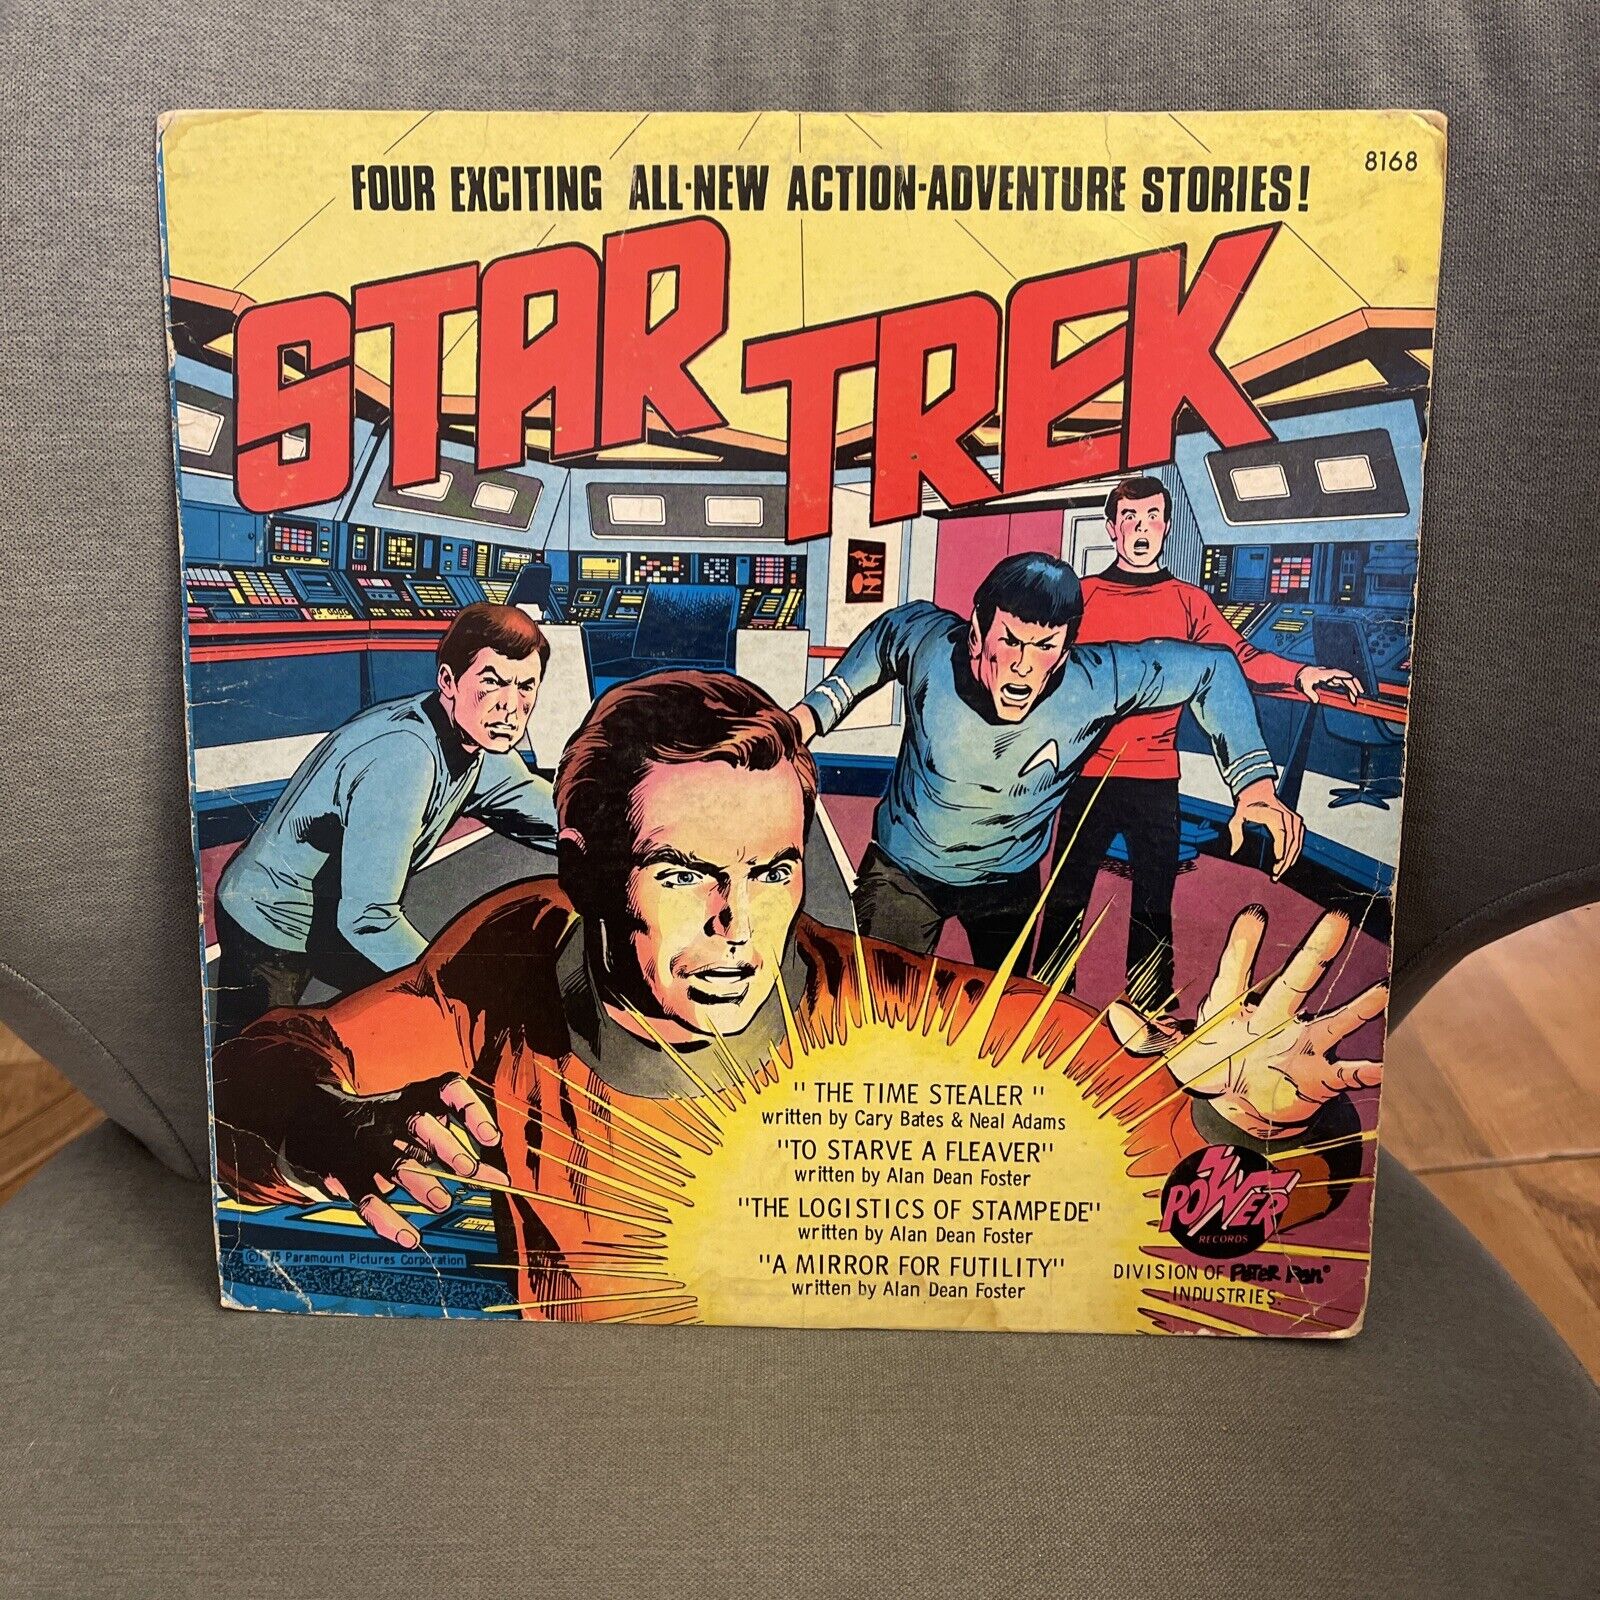 STAR TREK “Four Exciting All New Action-Adventure Stories” 8168 Power